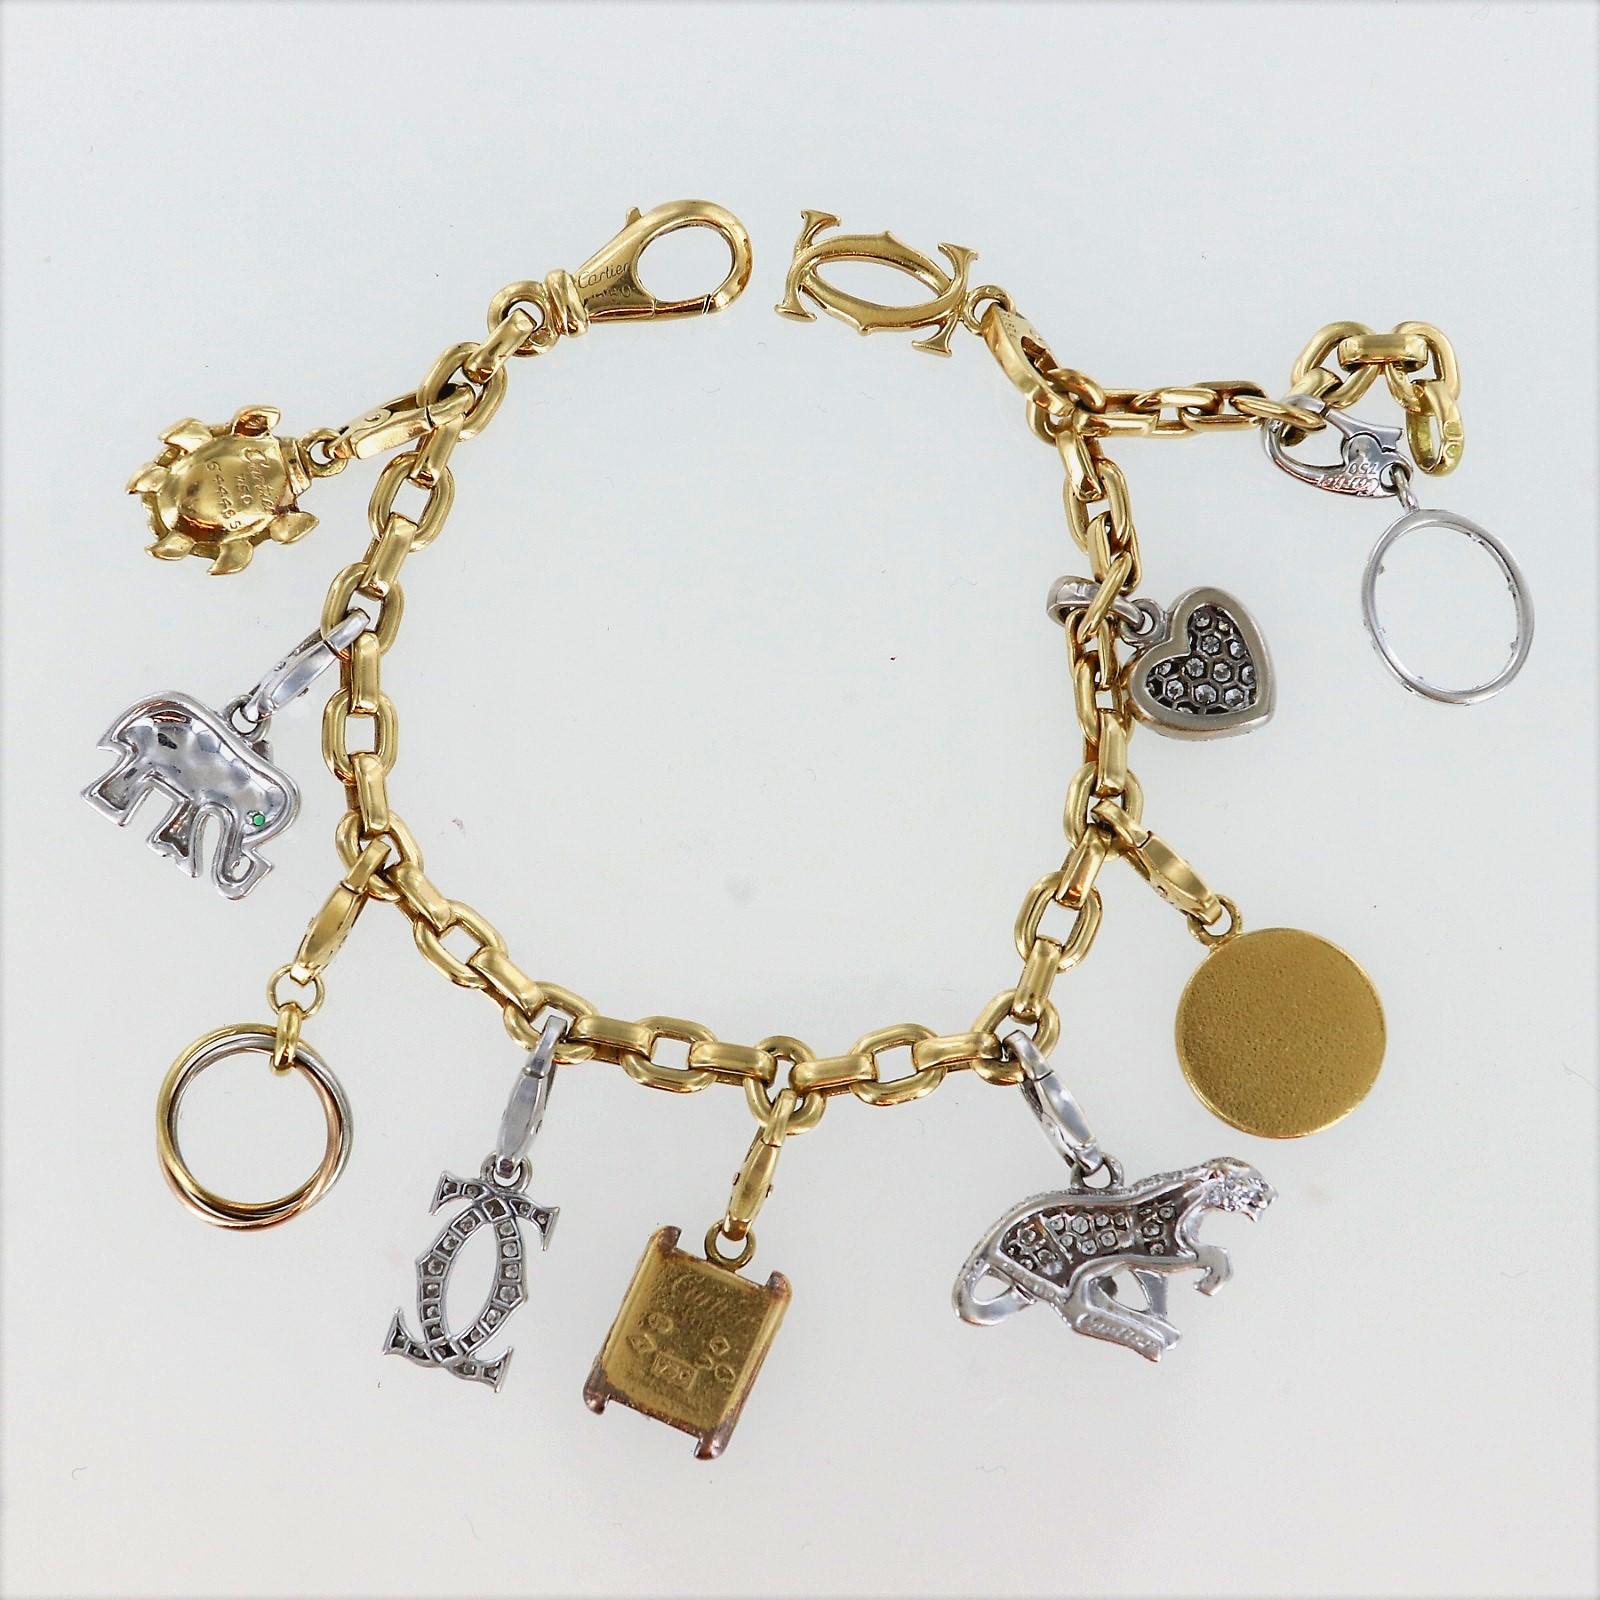 Each charm and bracelet numbered and signed Cartier